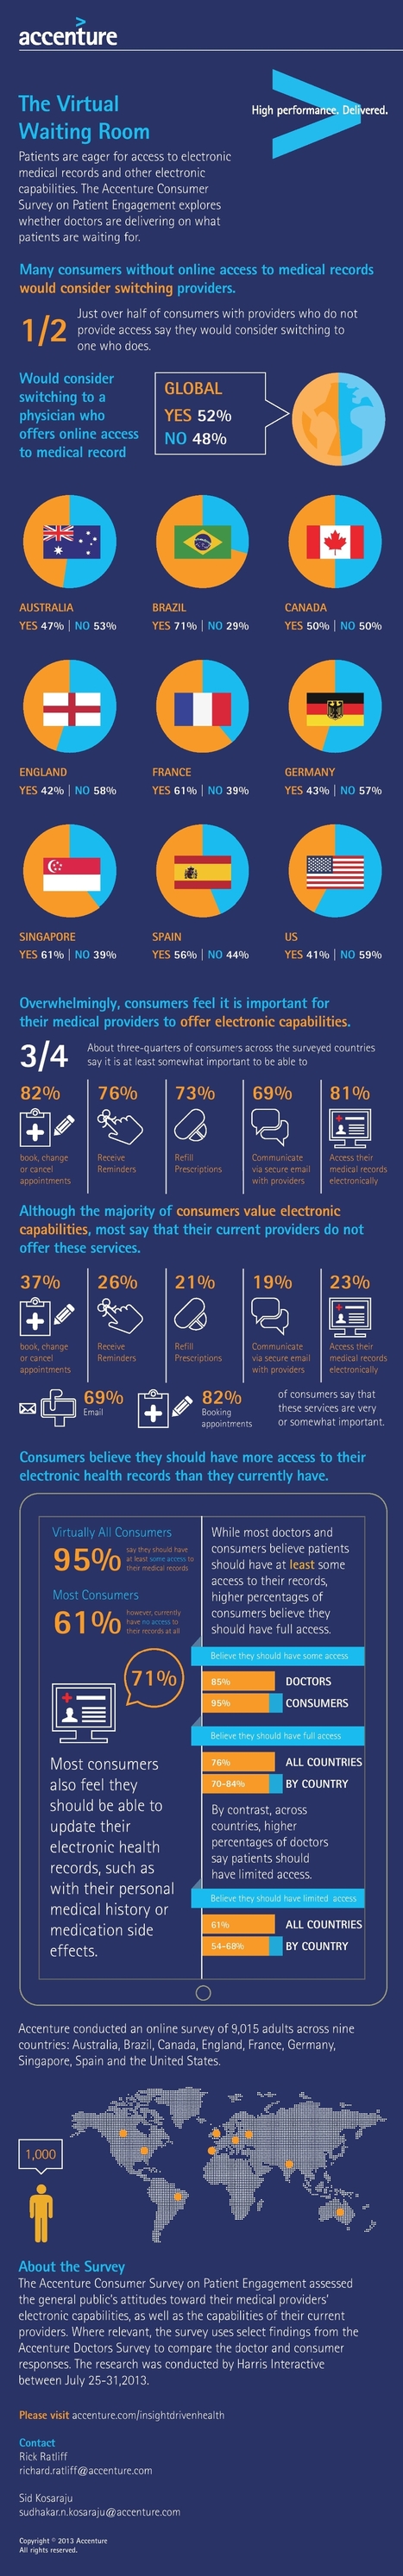 Infographic: Patients Want Access To Their Electronic Medical Records | PATIENT EMPOWERMENT & E-PATIENT | Scoop.it